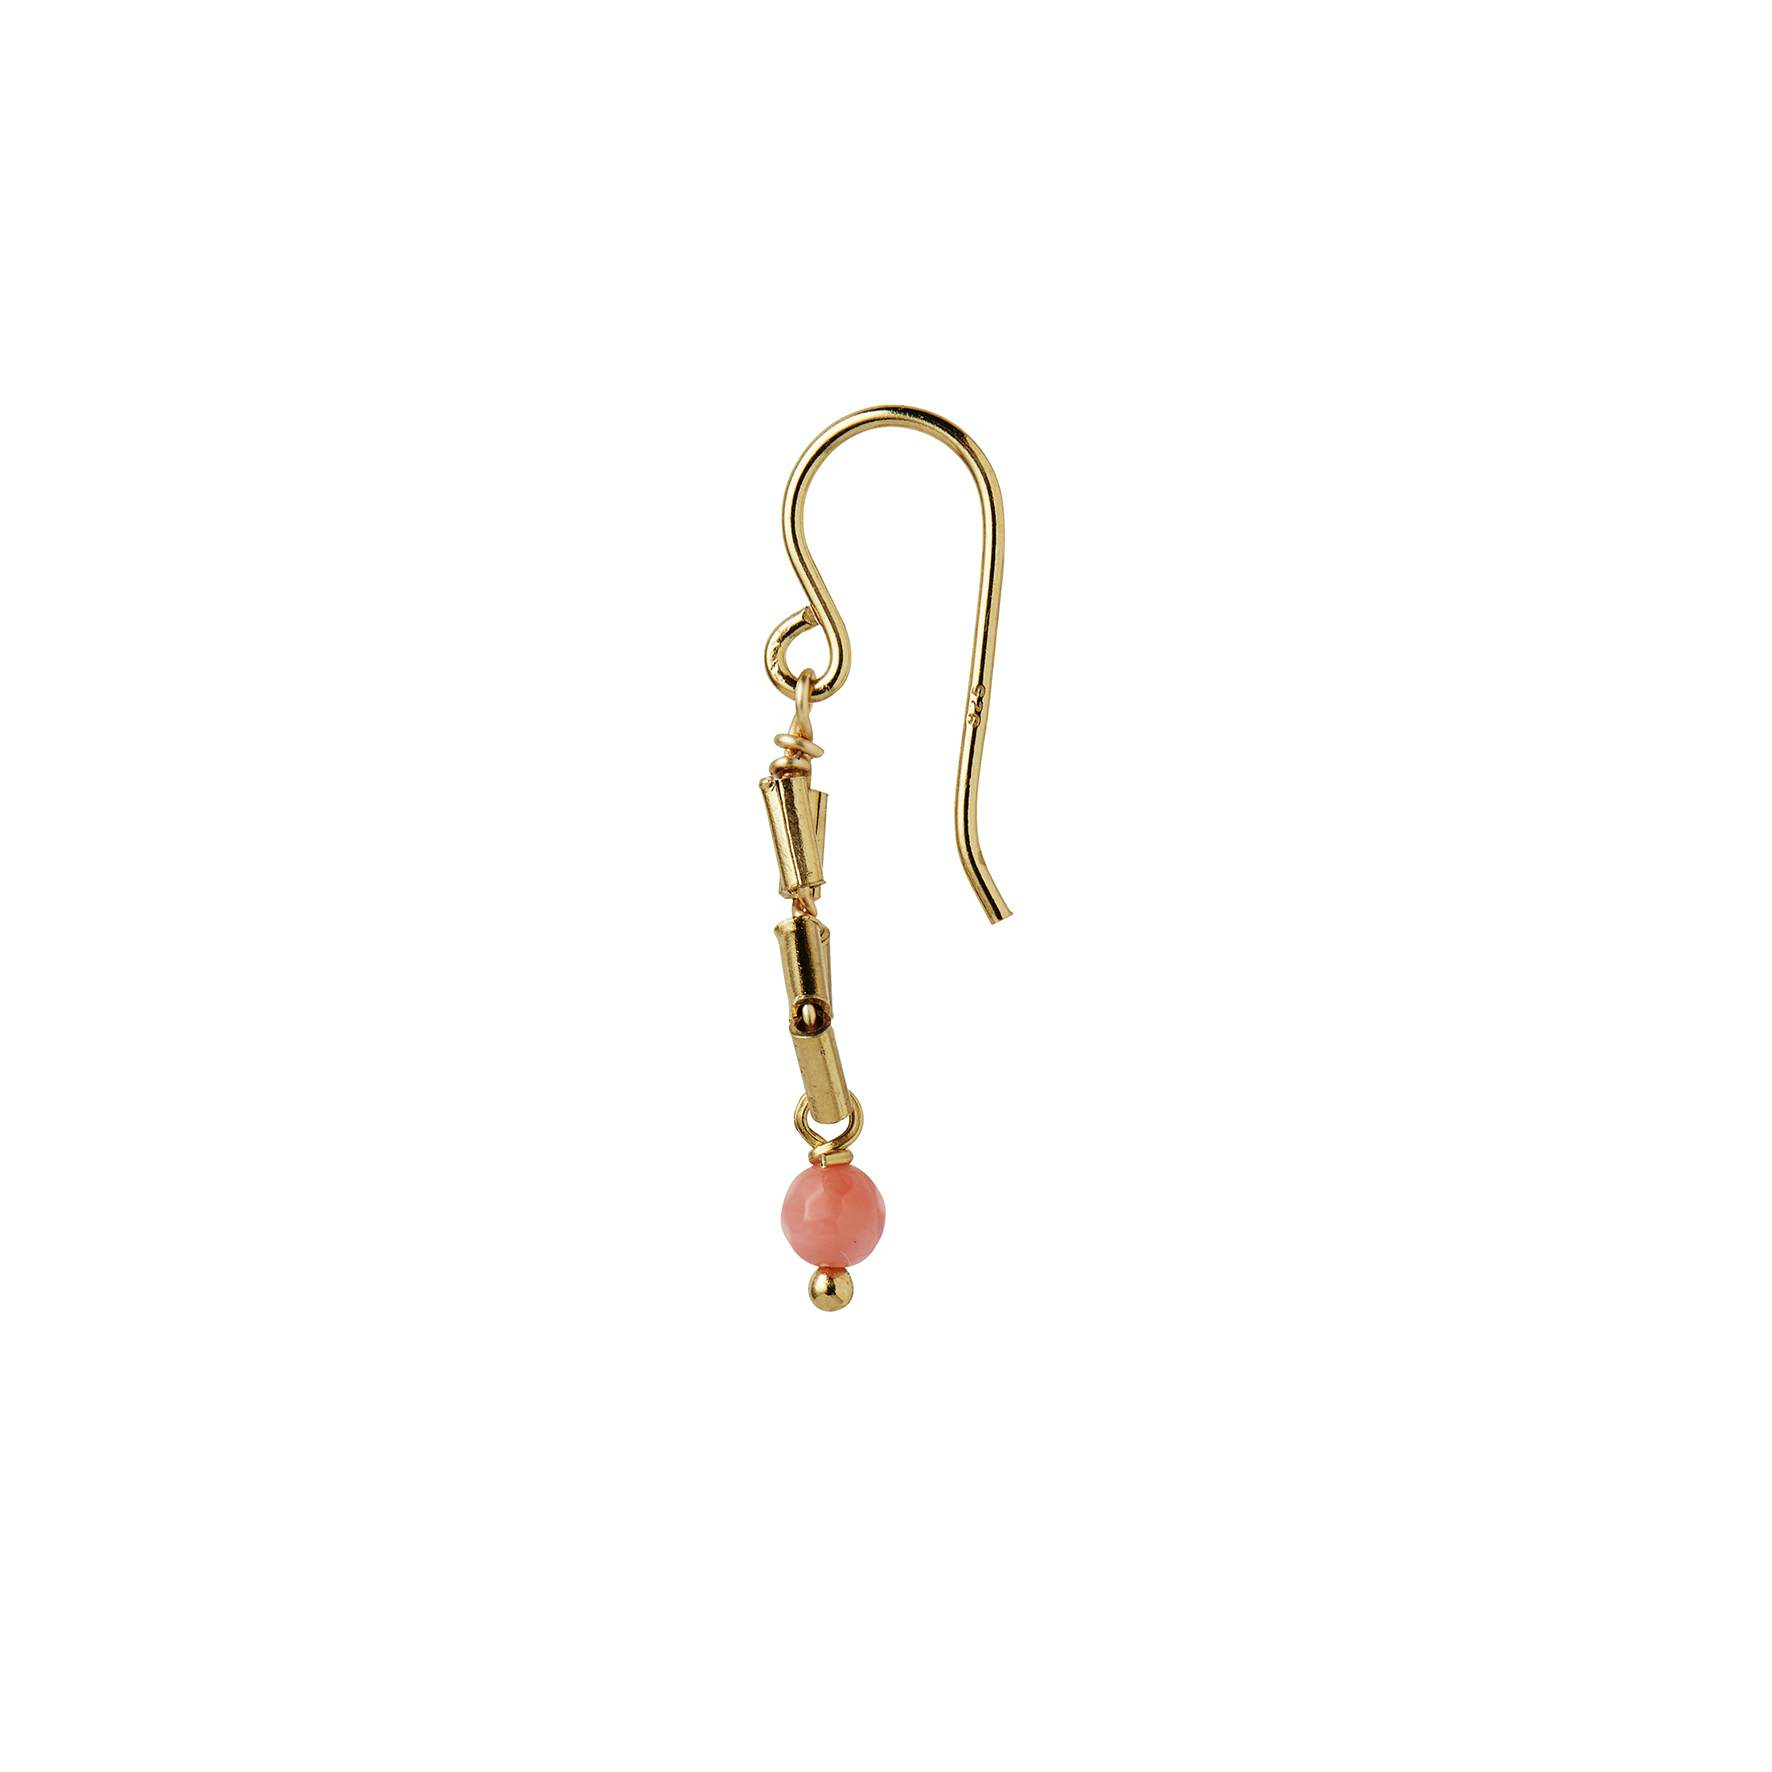 Petit Carré Earring with Coral fra STINE A Jewelry i Forgyldt-Sølv Sterling 925